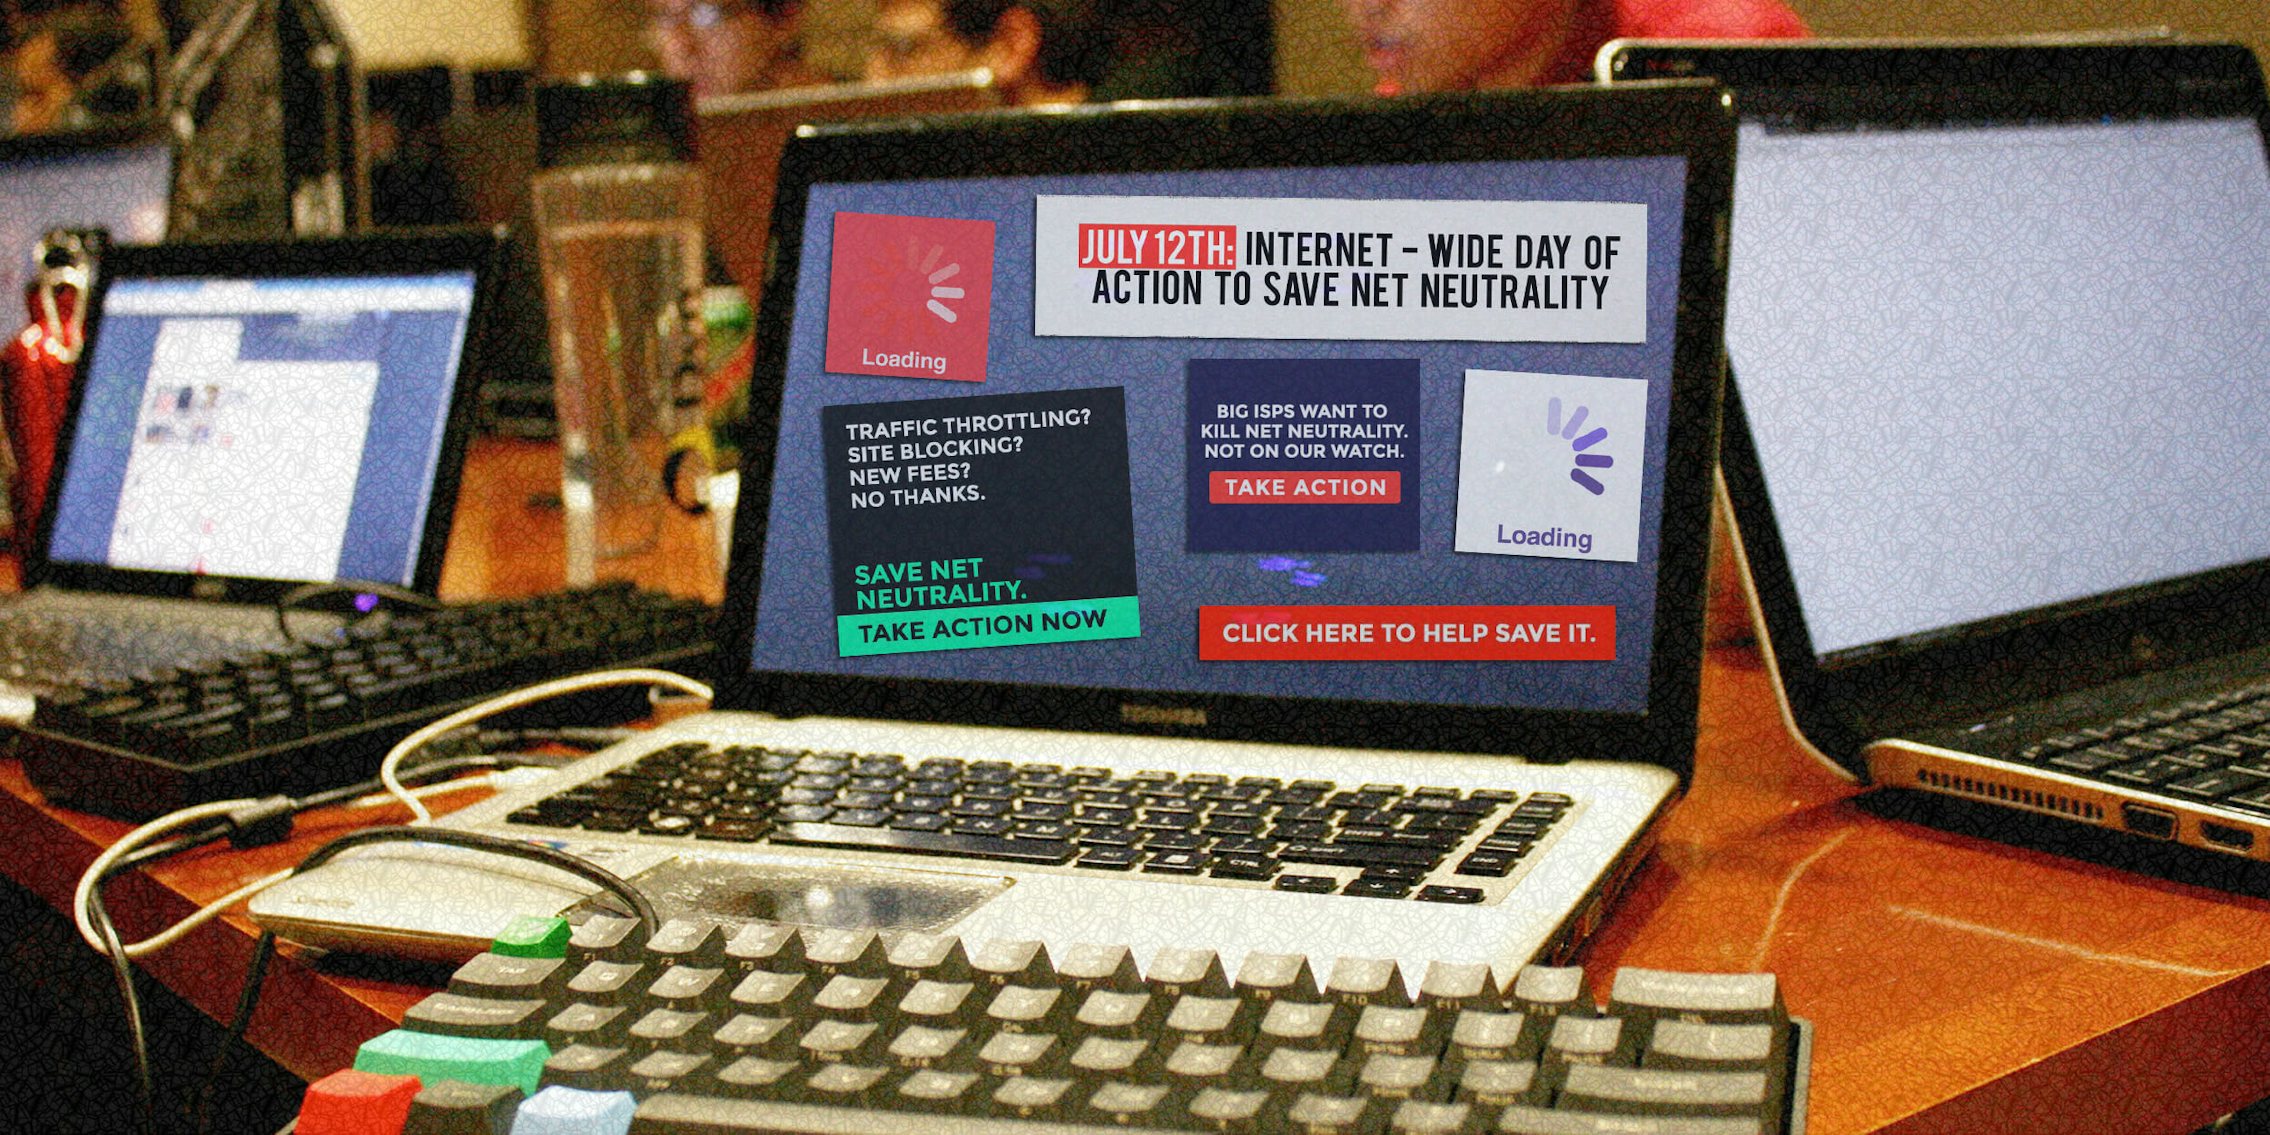 Internet groups are advocating for net neutrality on July 12